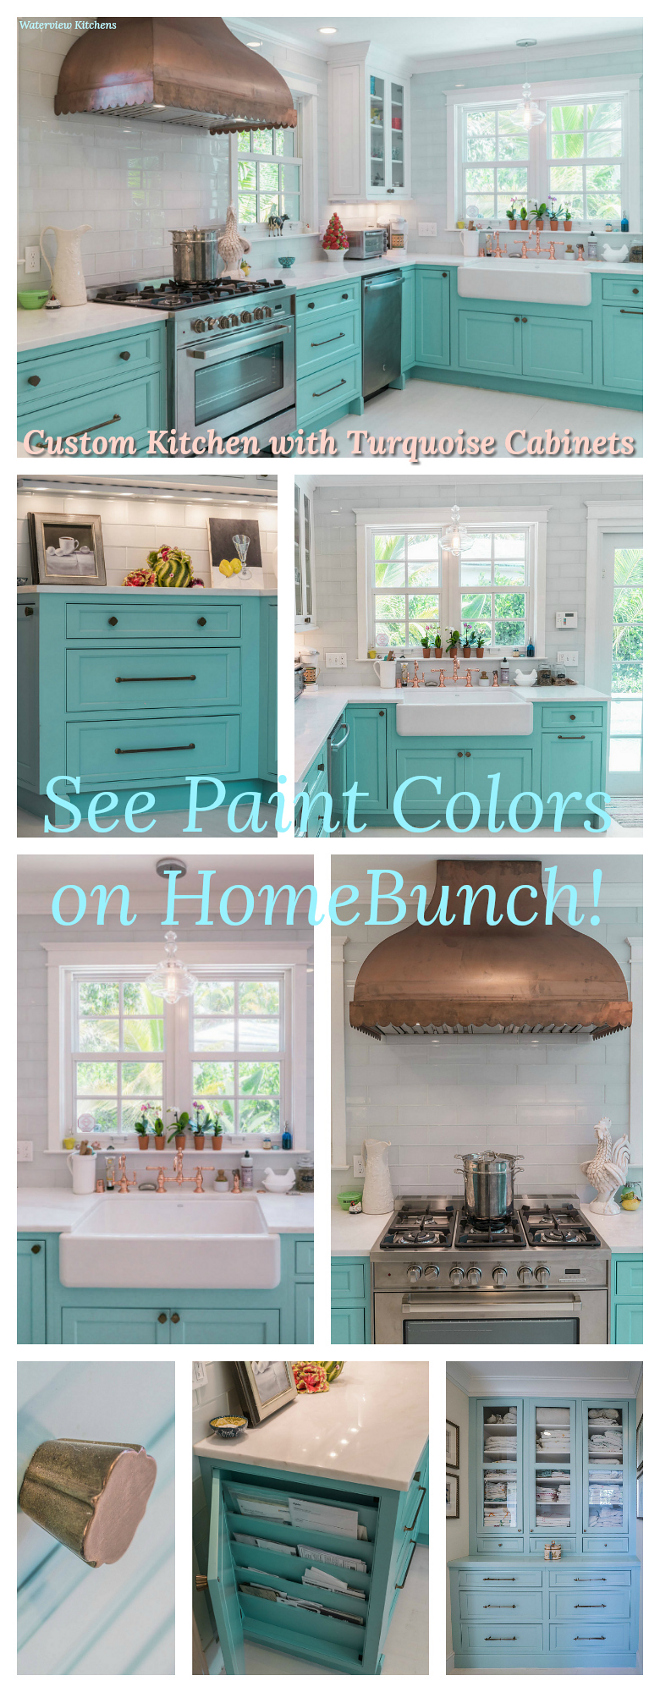 Custom Kitchen with Turquoise Cabinets Paint color and sources on Home Bunch